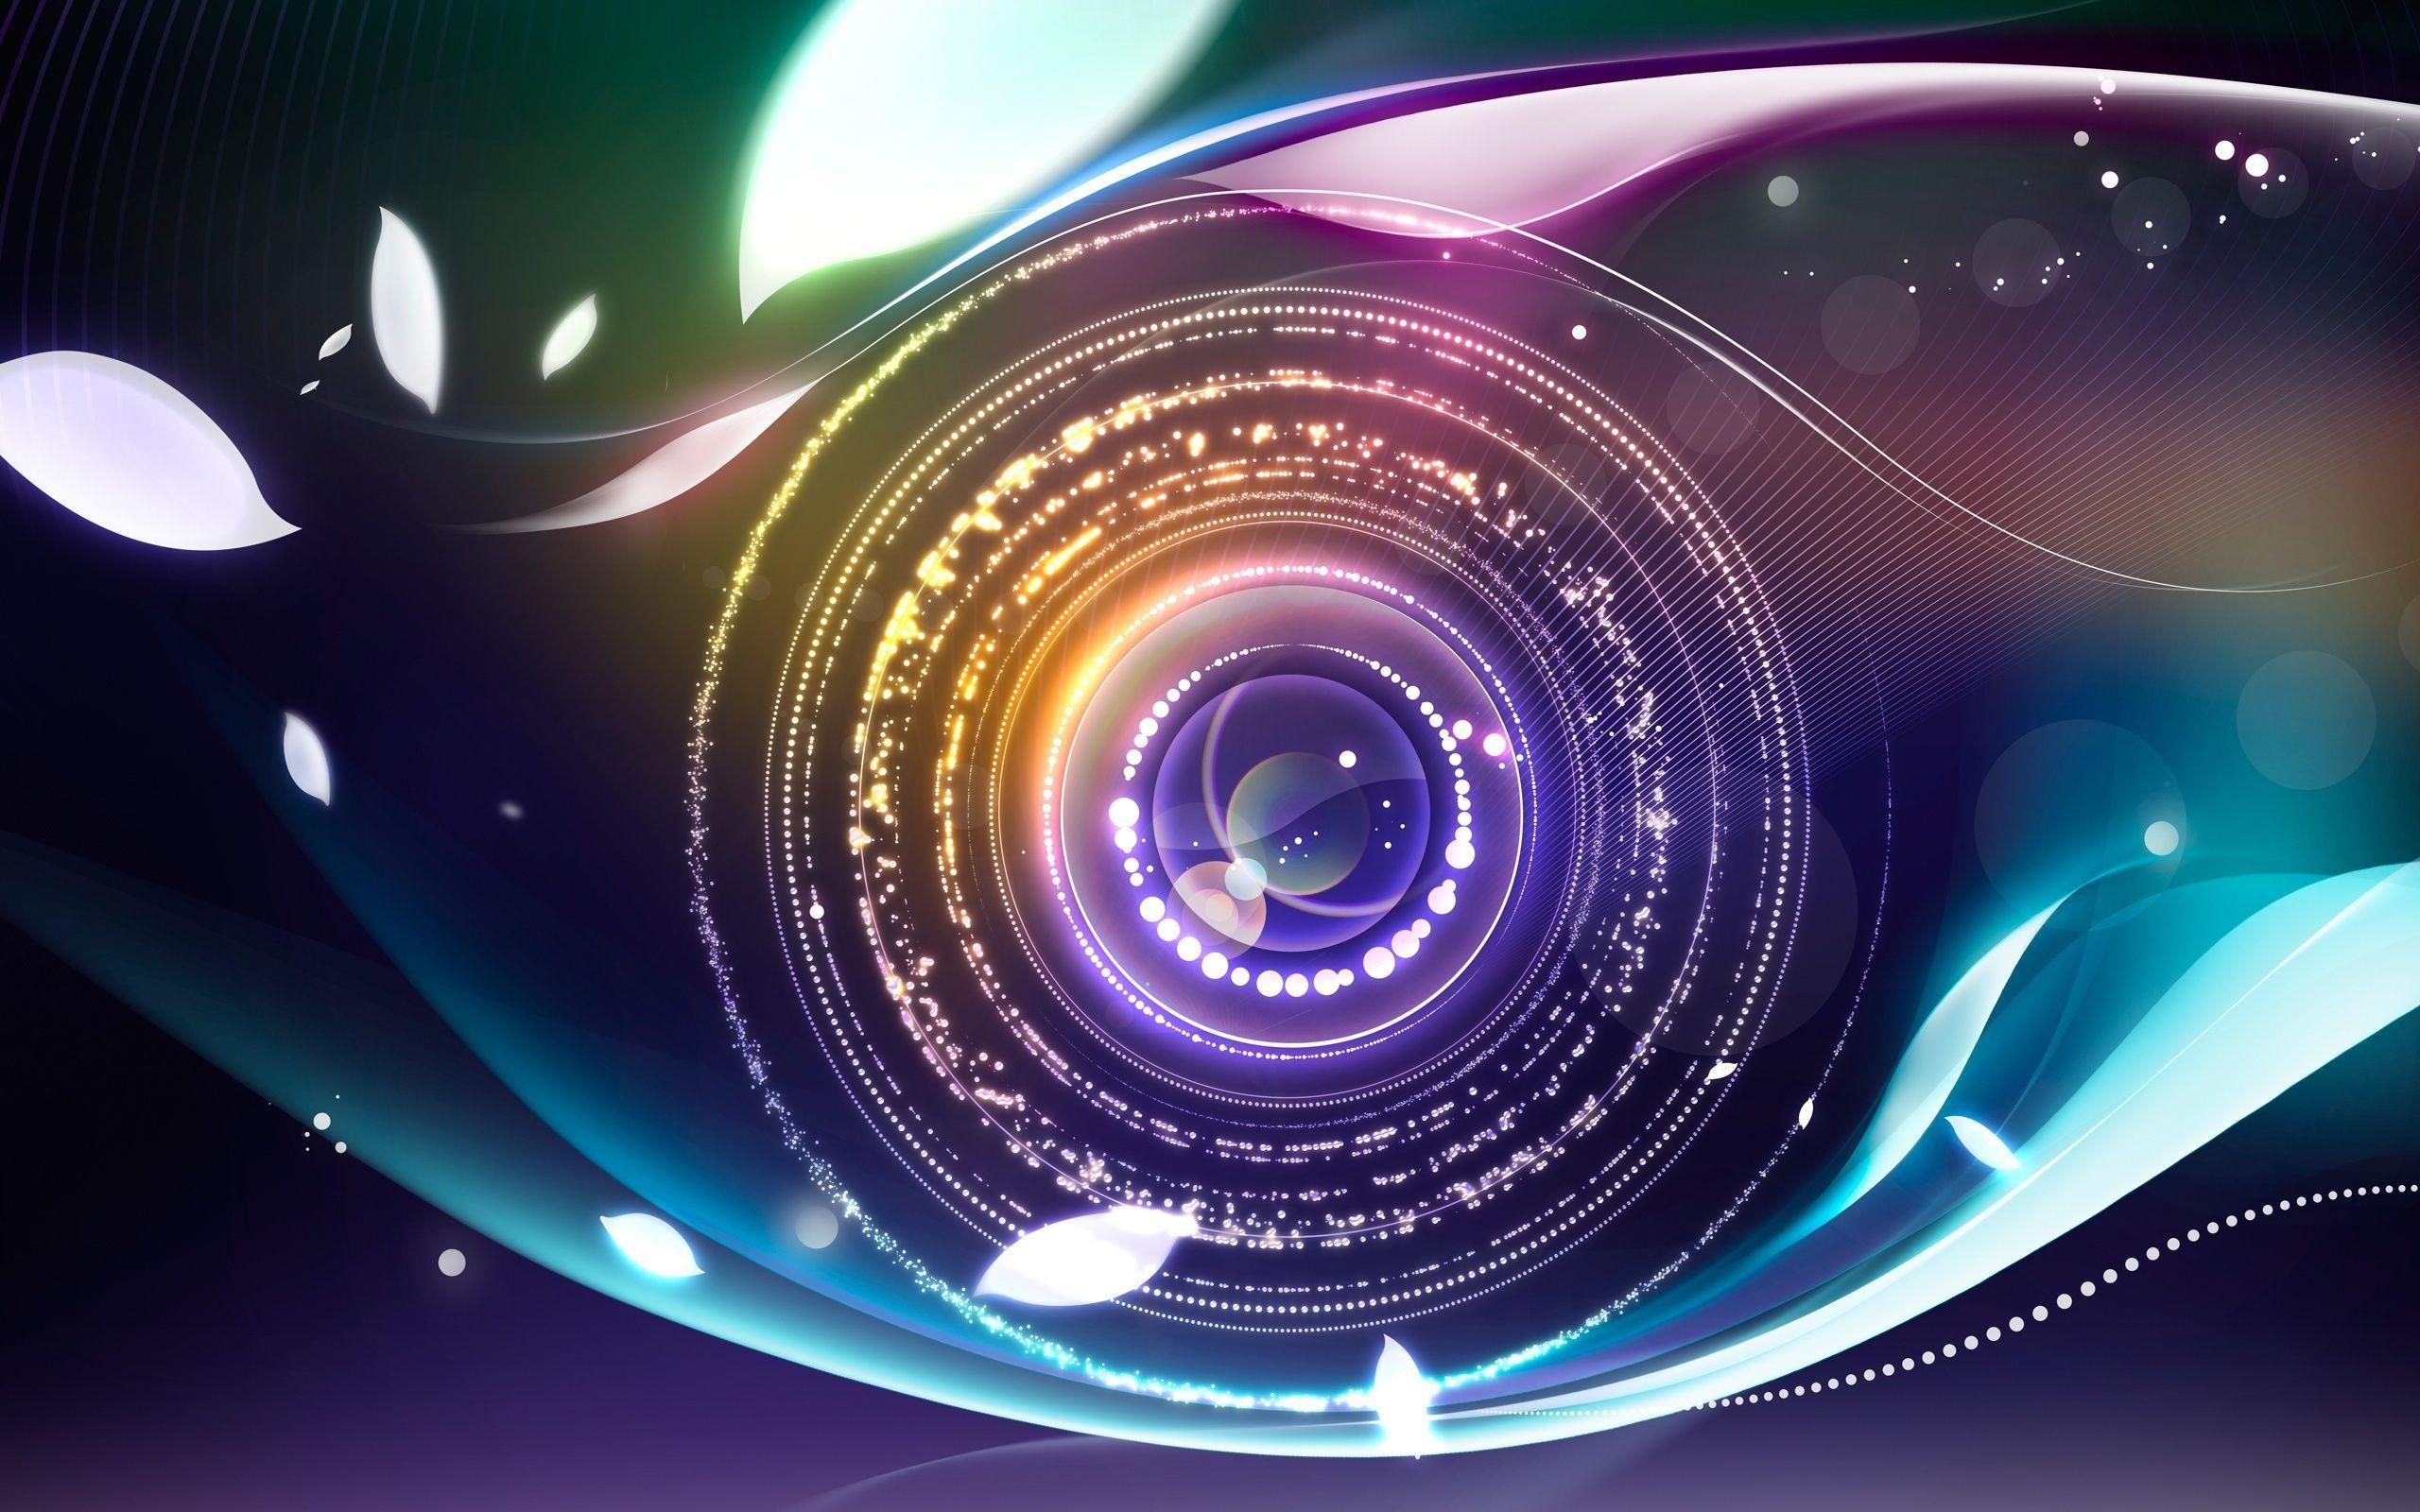 Camera Lens Wallpaper Android, Other Wallpaper